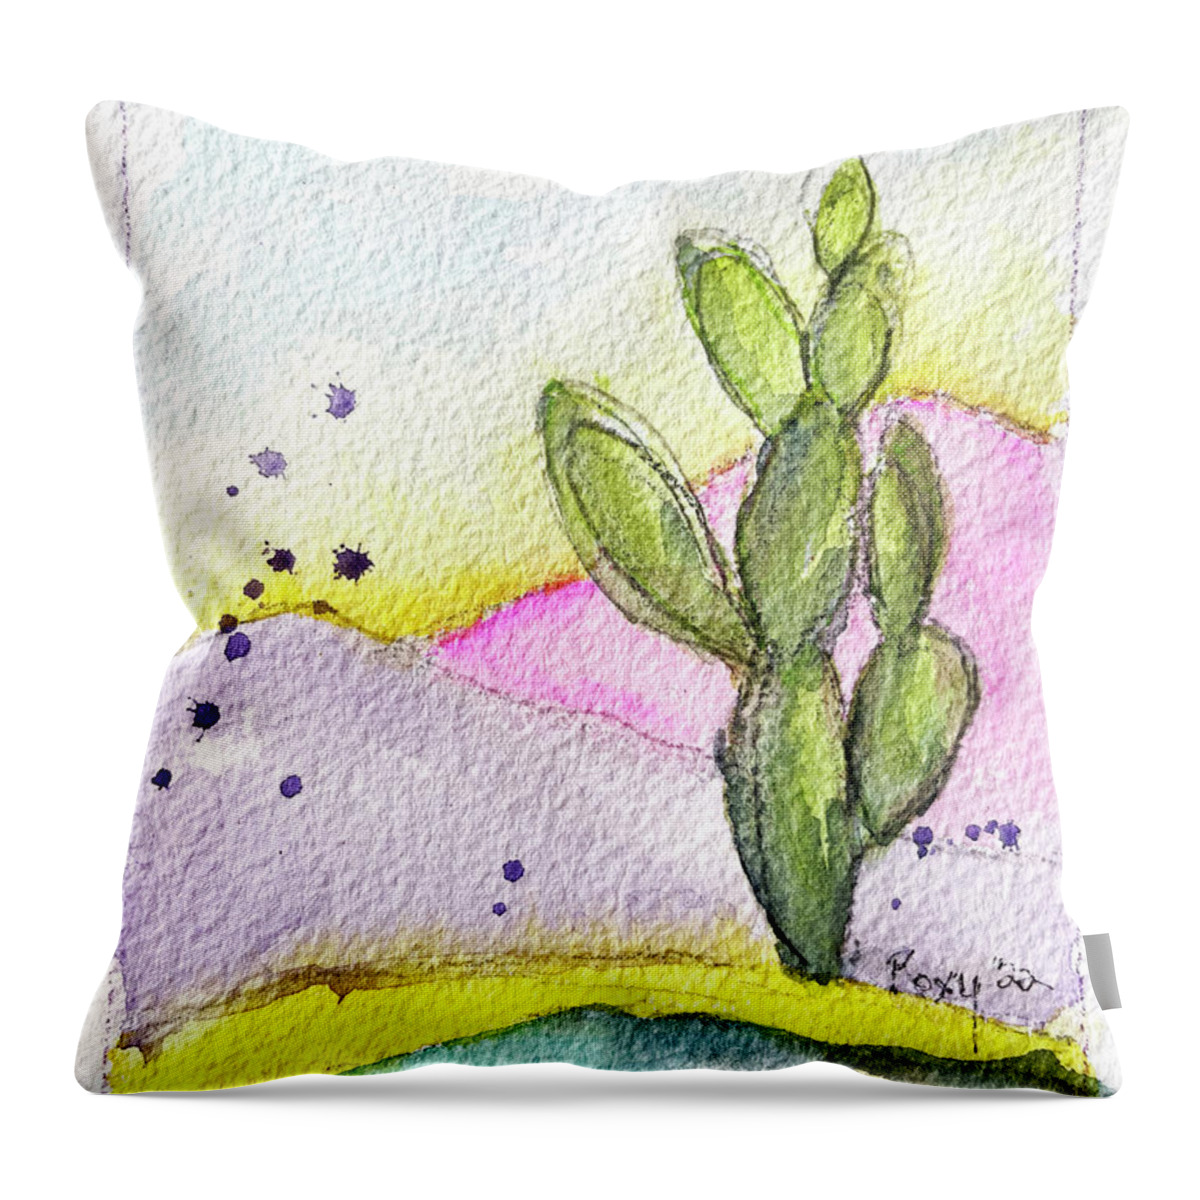 Pastel Throw Pillow featuring the painting Pastel Cactus by Roxy Rich